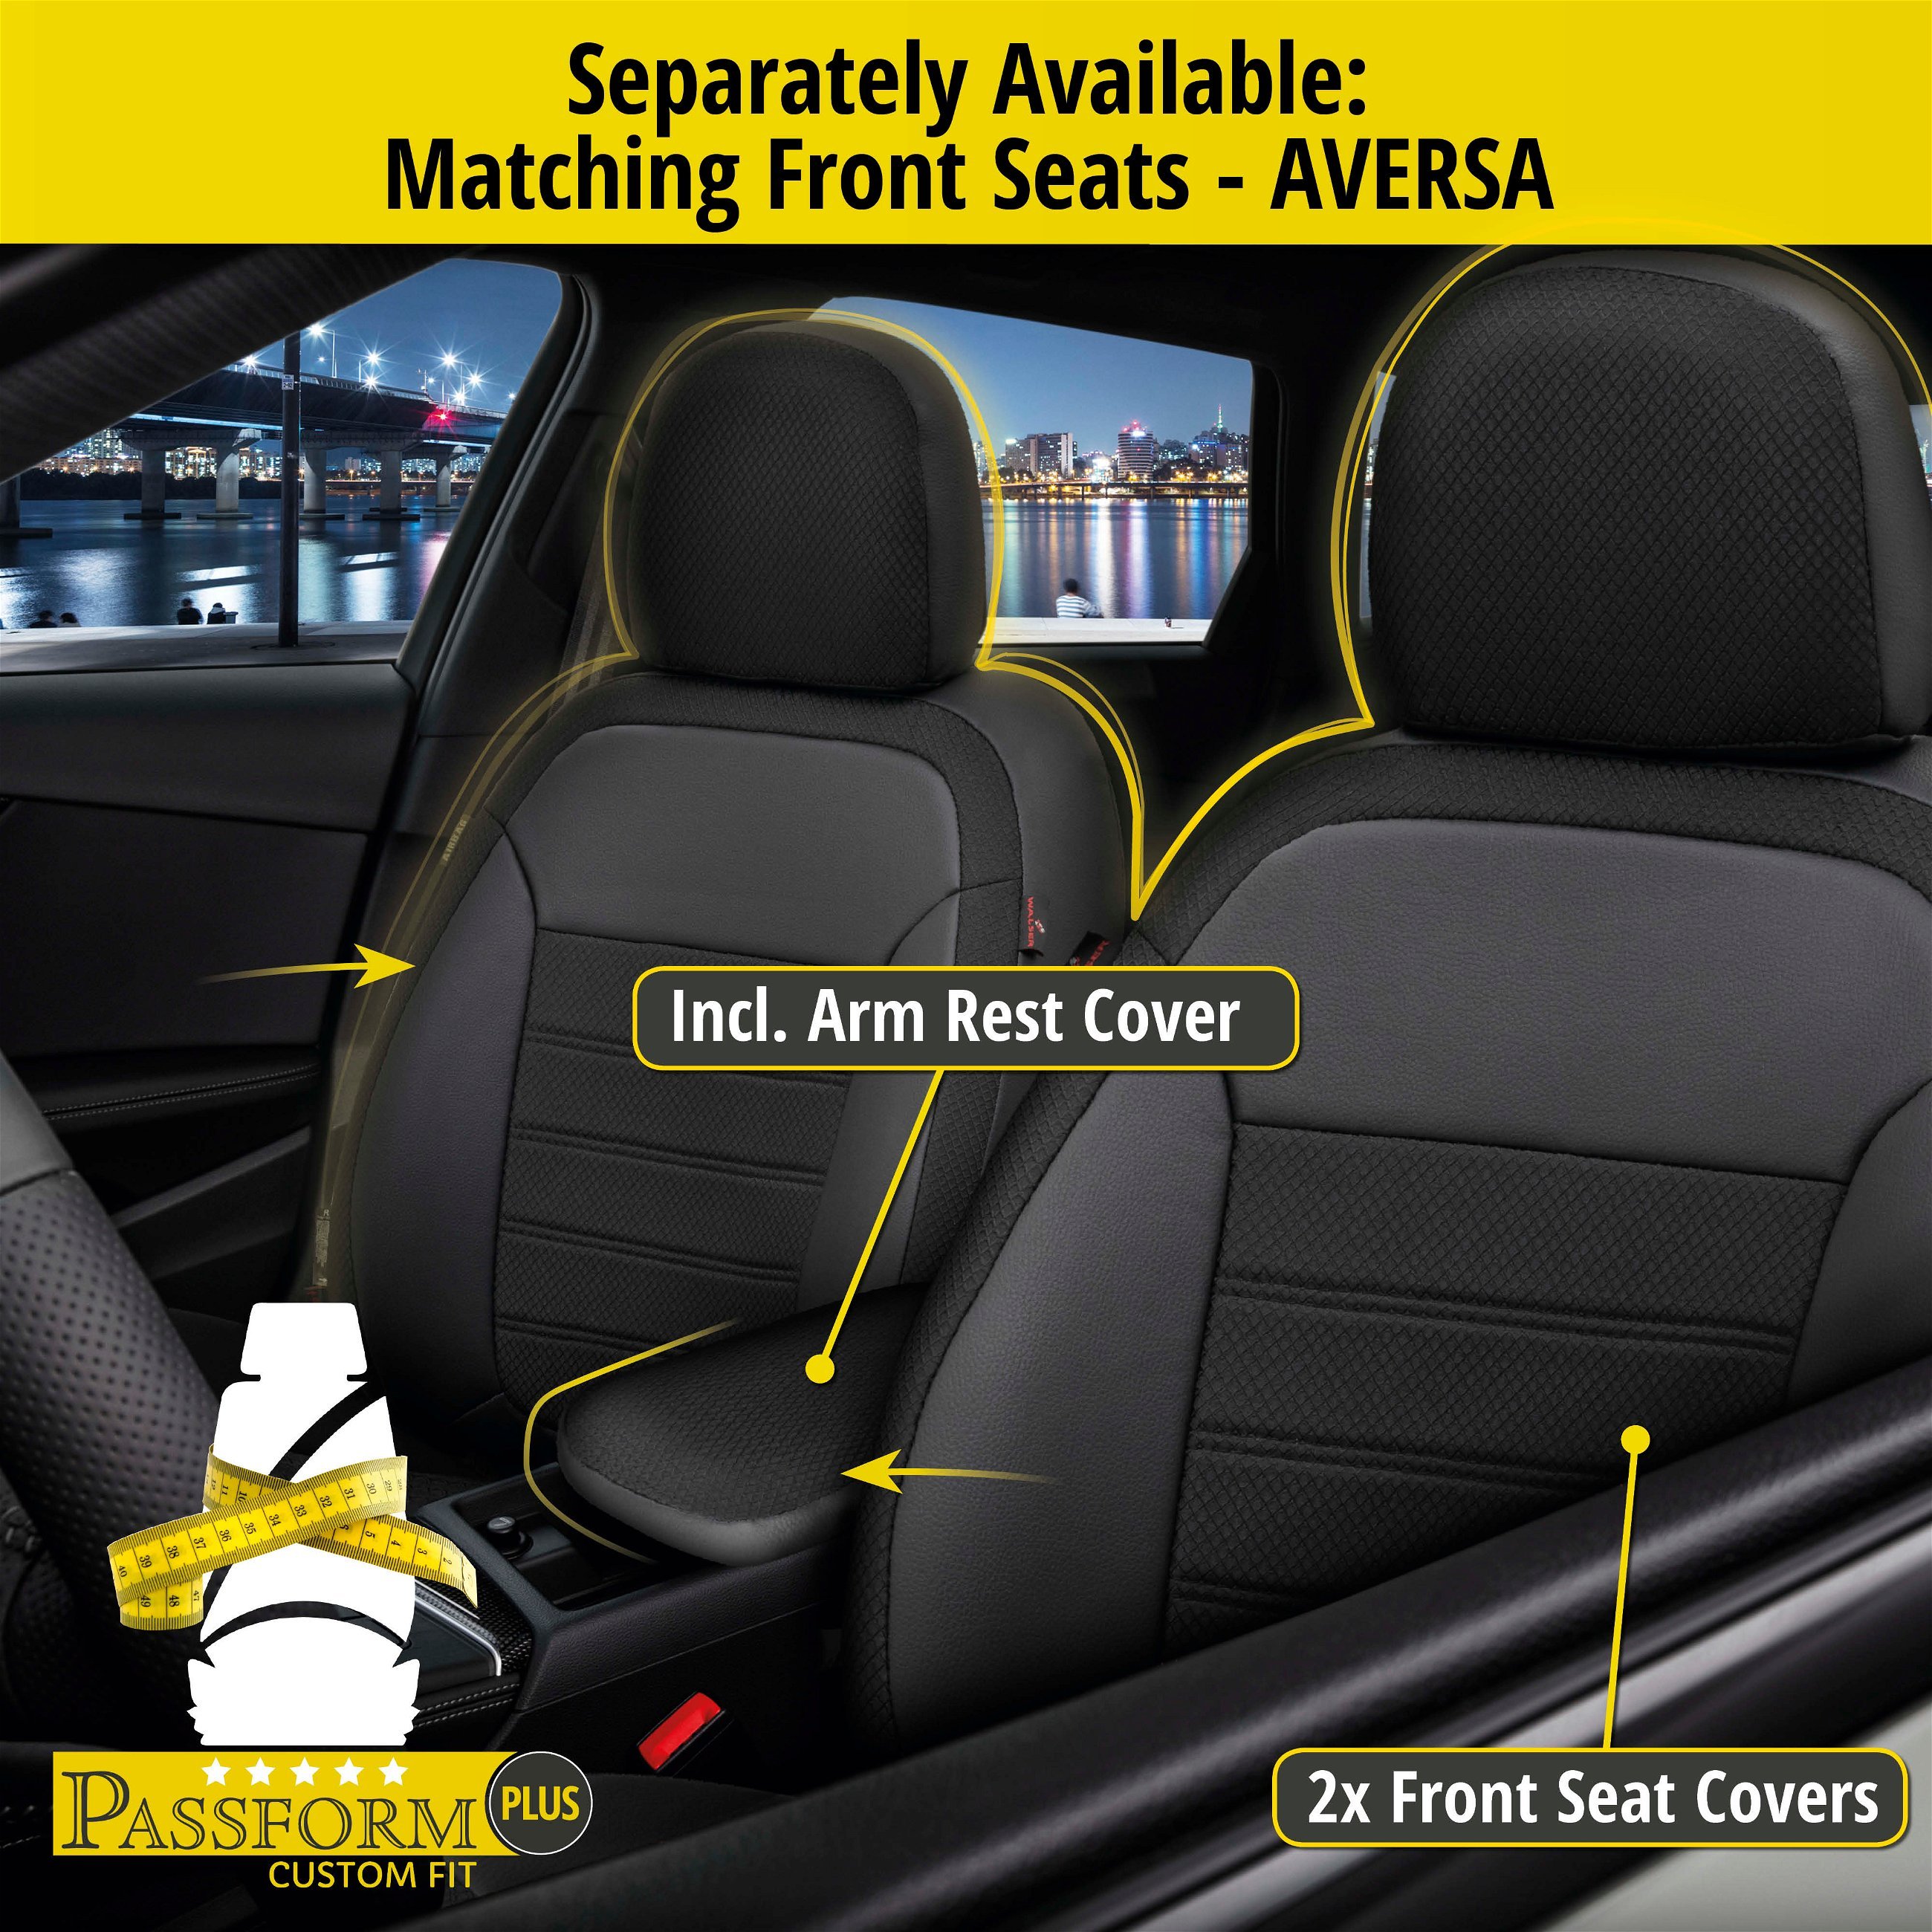 Seat Cover Aversa for VW Golf VIII 07/2019-Today, 1 rear seat cover for normal seats